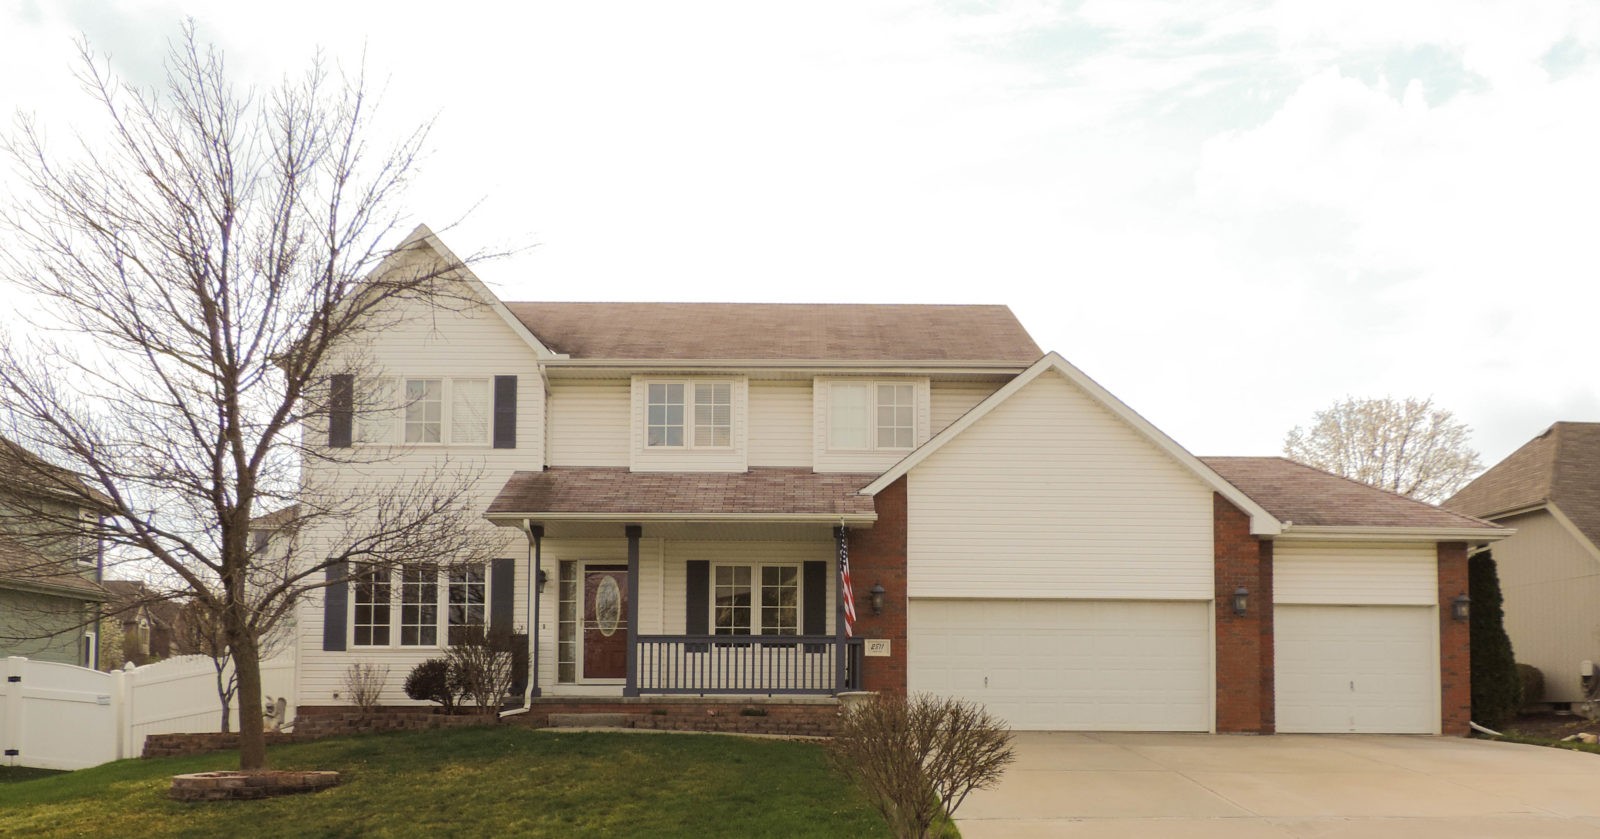 Price Reduction ~ Impressive 2 Story 5 Bedroom & 4 Car Garage Home in Eagle Hills Subdivision!